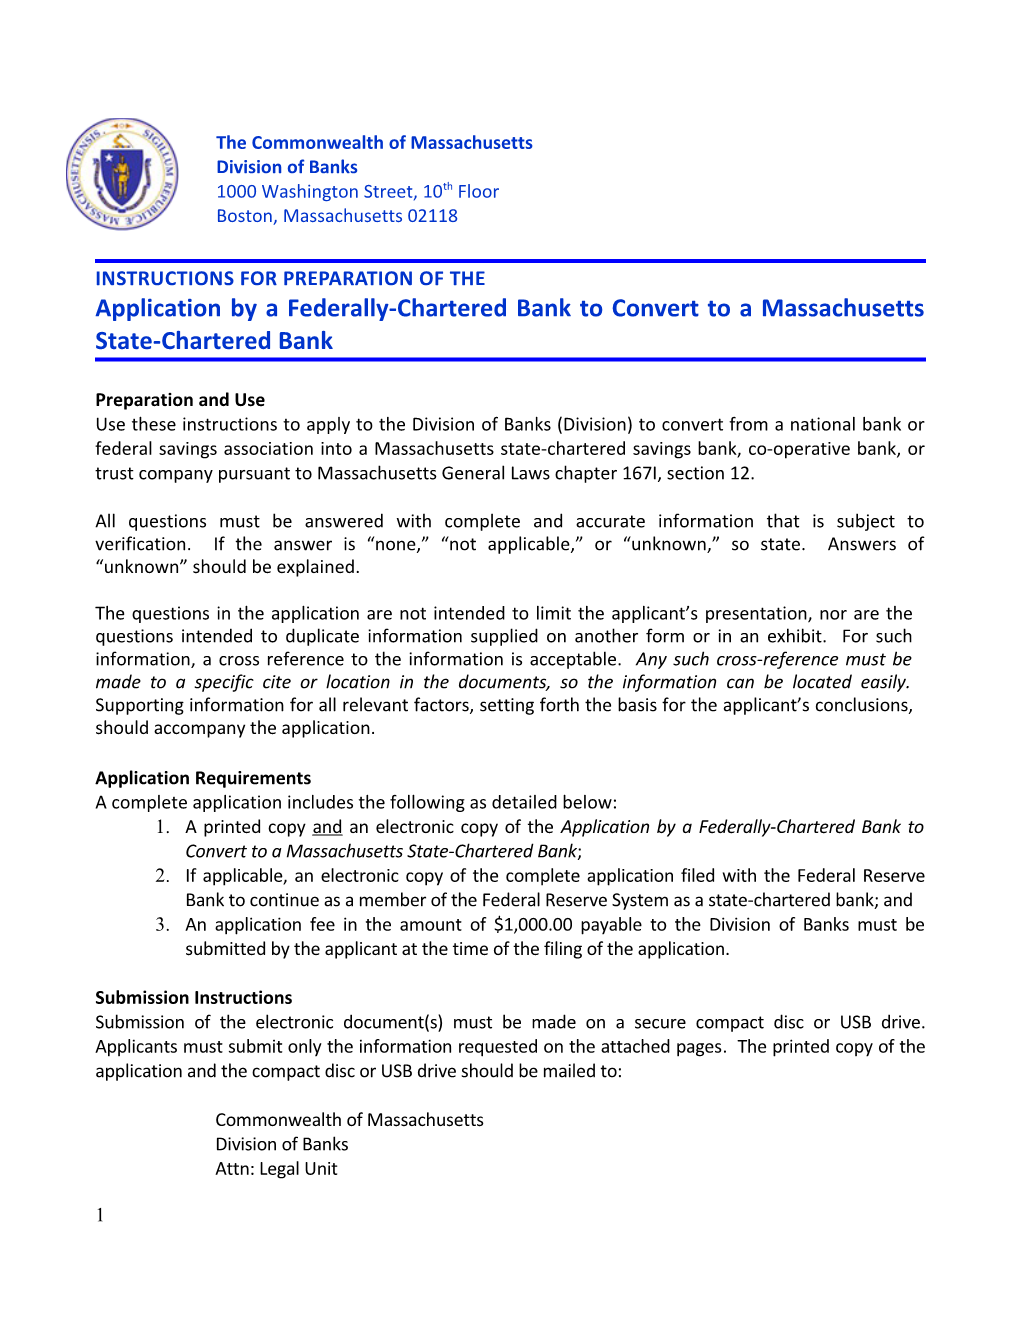 Application by a Federally-Chartered Bank to Convert to a Massachusetts State-Chartered Bank